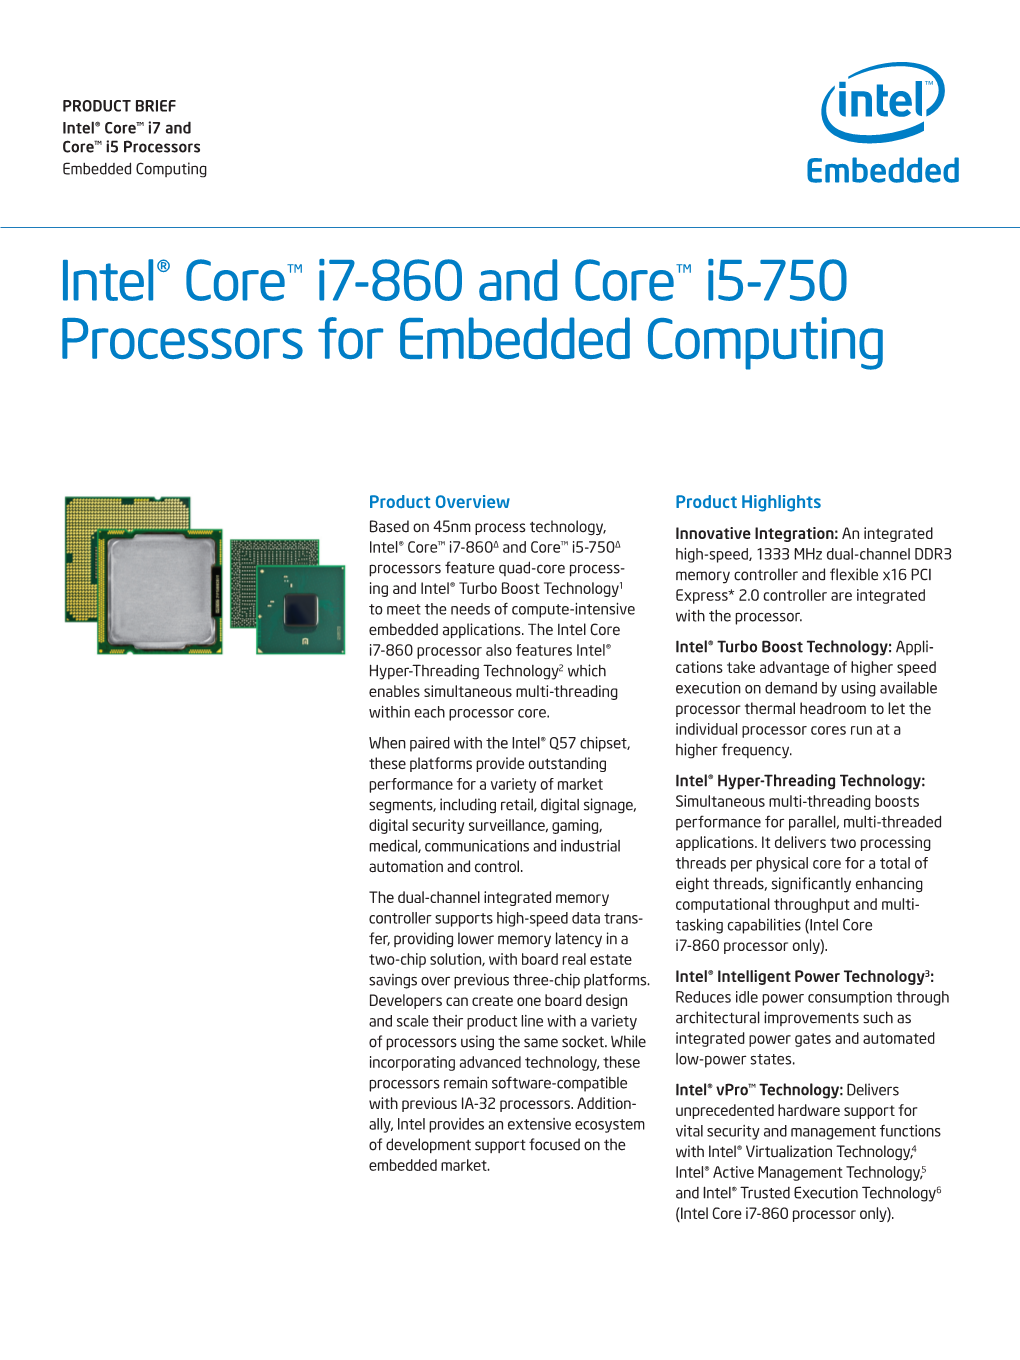 Intel® Core™ I7-860 and Core™ I5-750 Processors for Embedded Computing